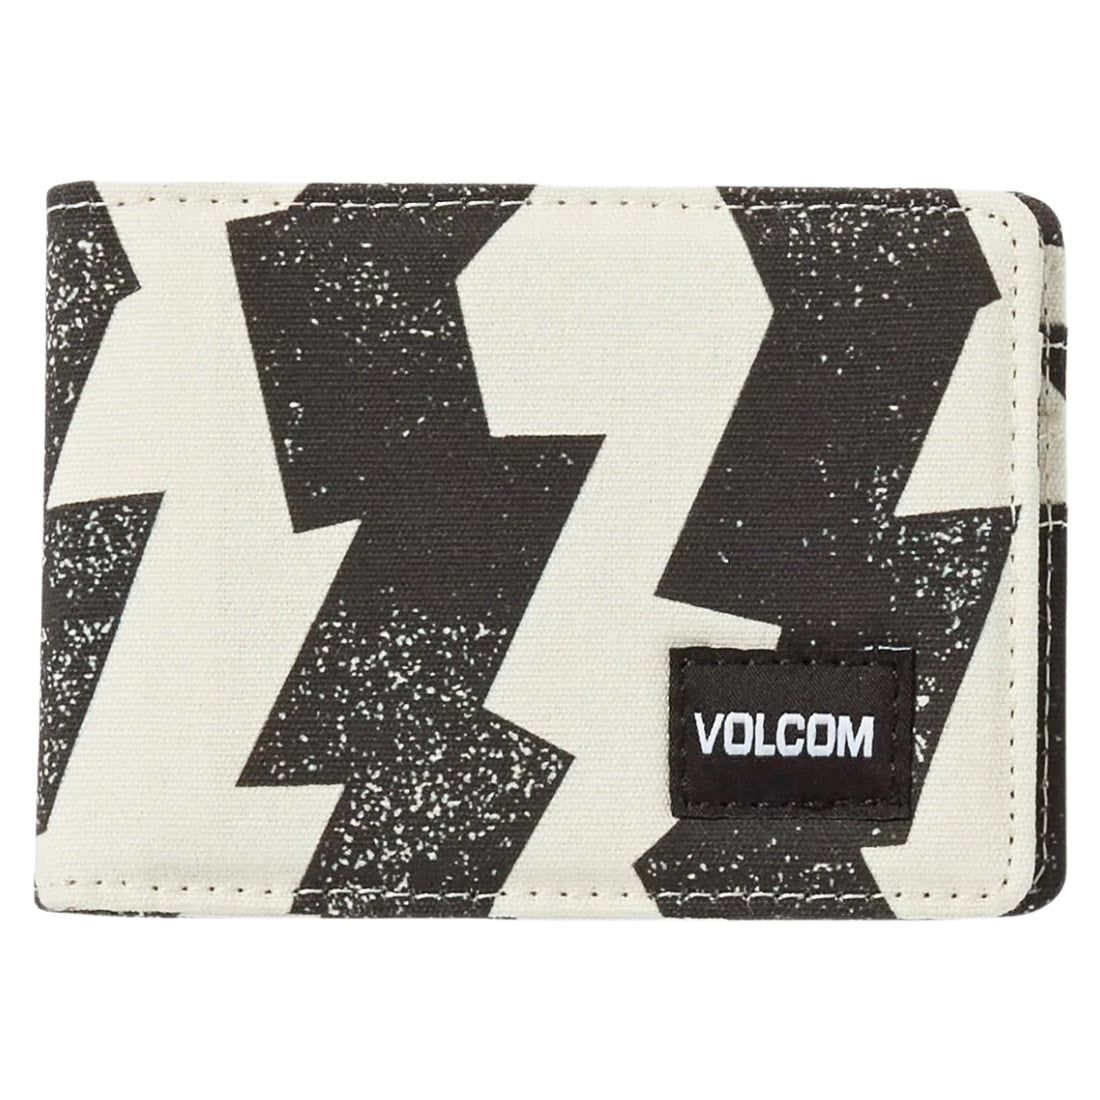 Volcom Post Bifold Wallet - Dirty White - Mens Wallet by Volcom